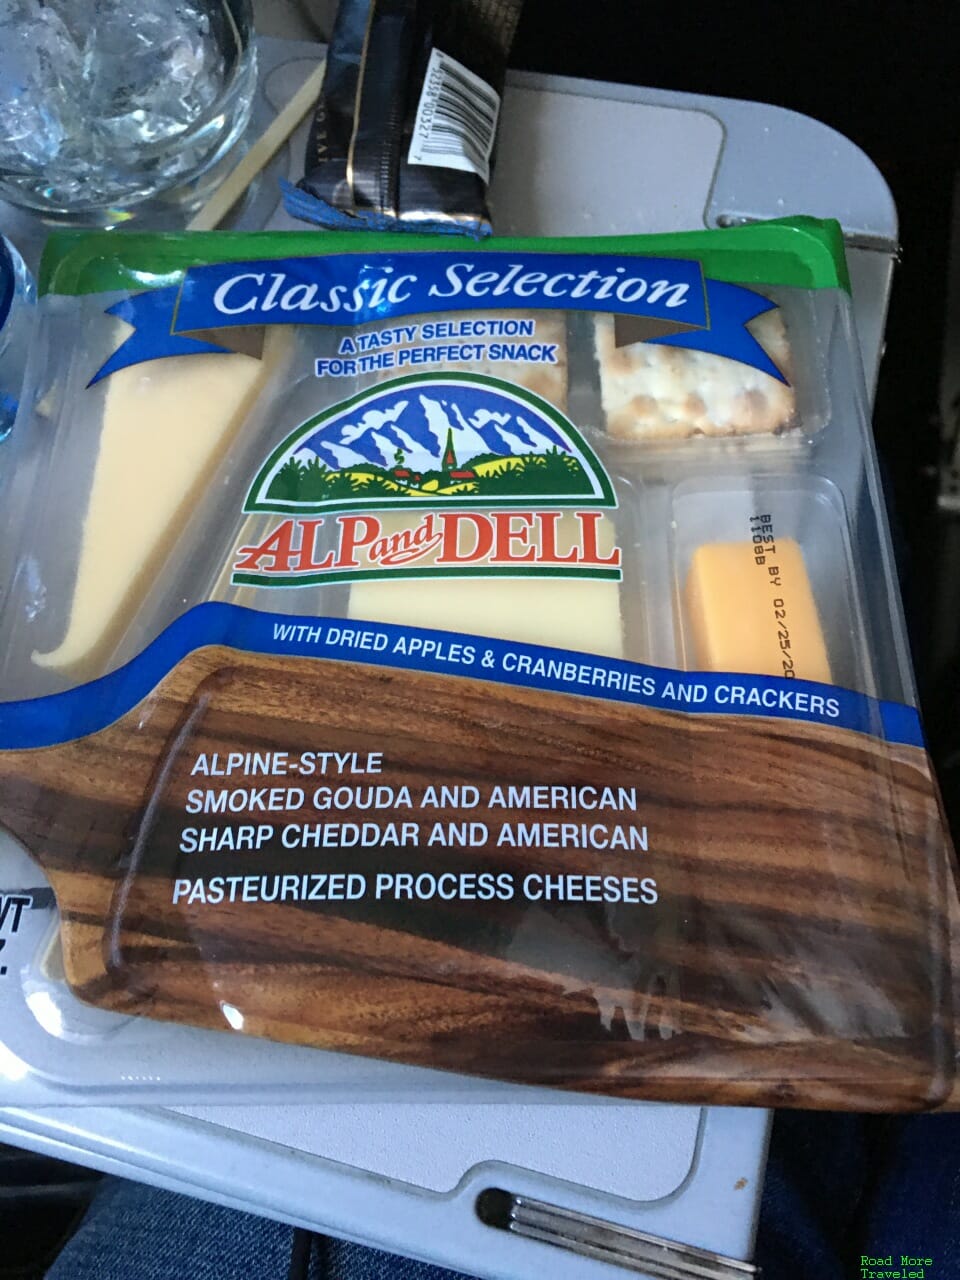 Packaged cheese and crackers